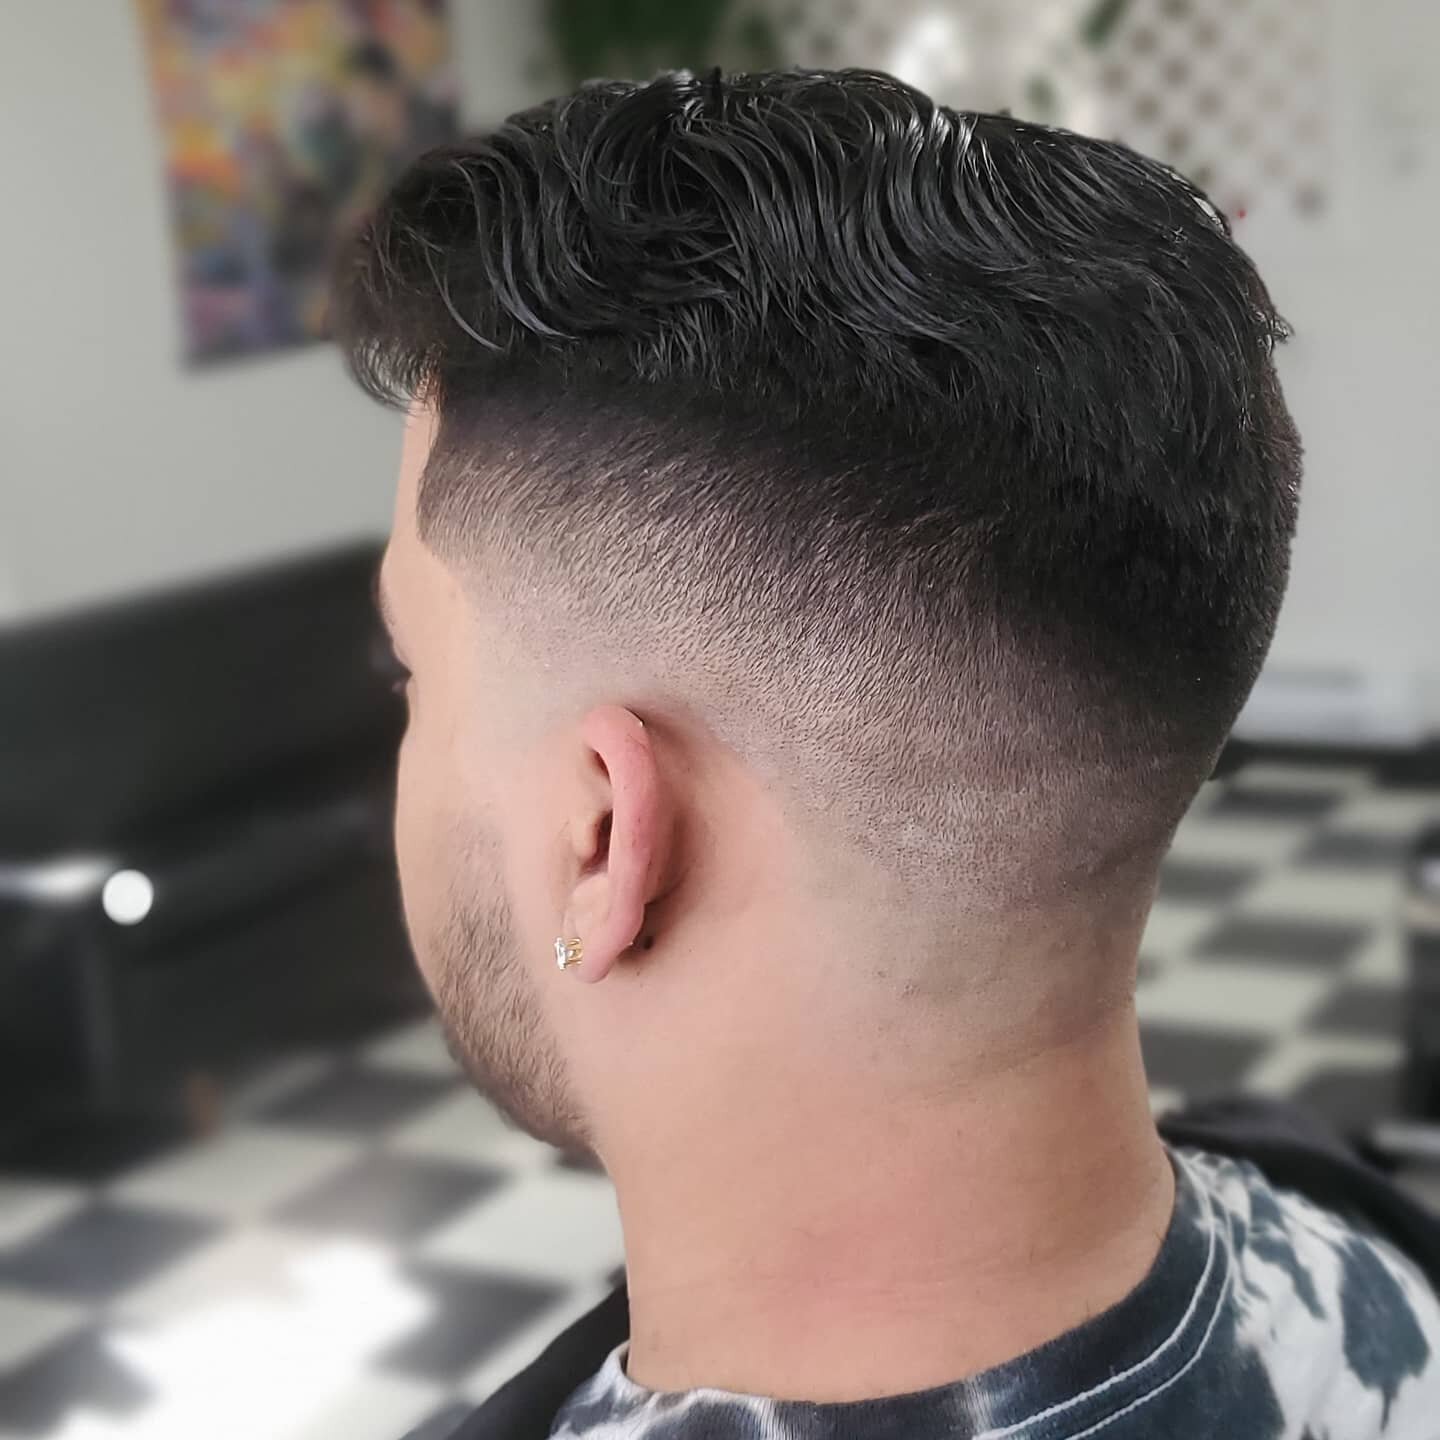 Modern style  men's haircut with fade and longer top scissor ✂️ cut. 
Book easily @ bethlehemhaircuts.com 

#haircut #menshaircut  #modernstyle #fade